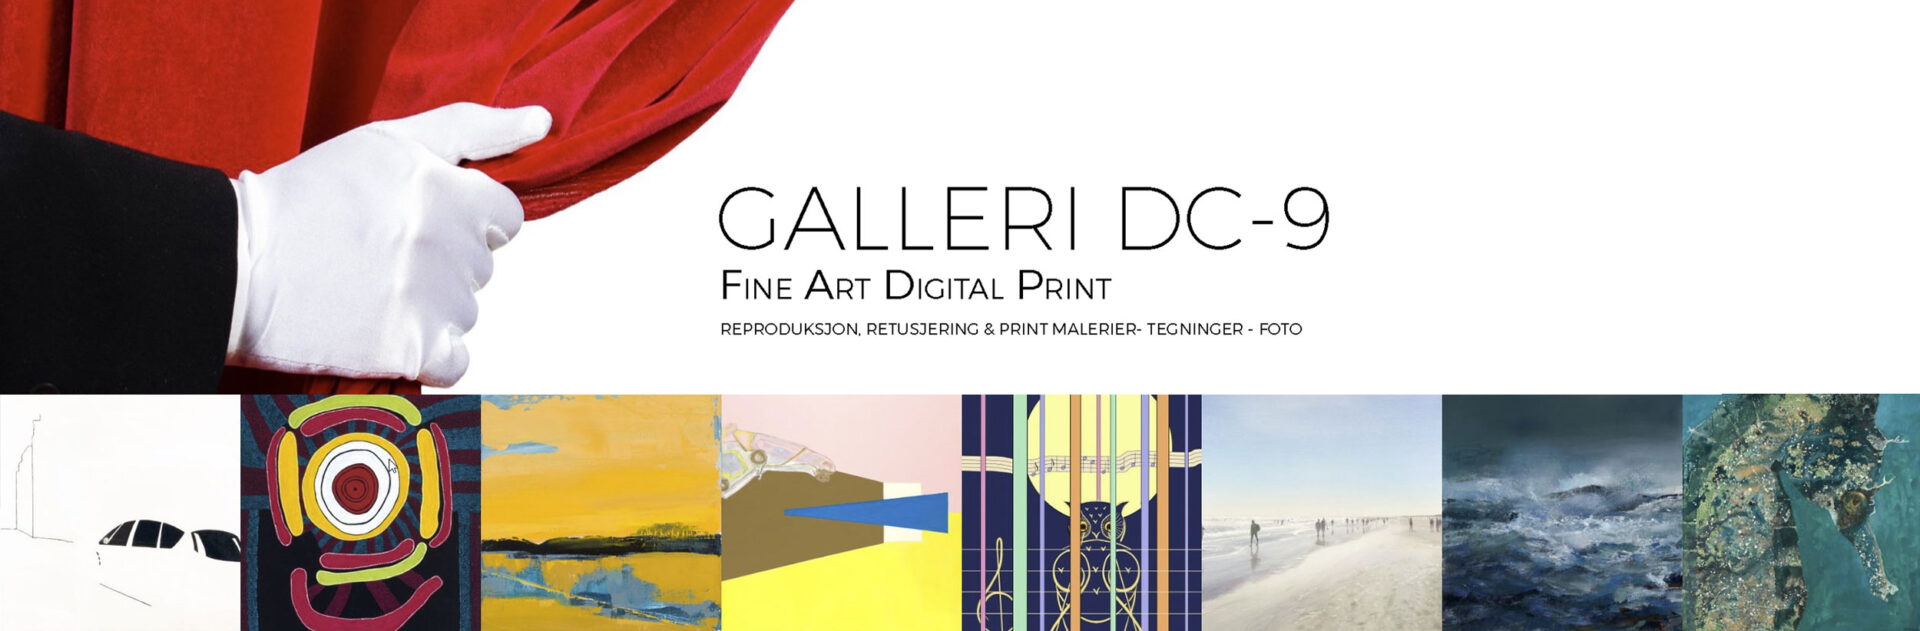 Featured image for “Galleri DC-9”